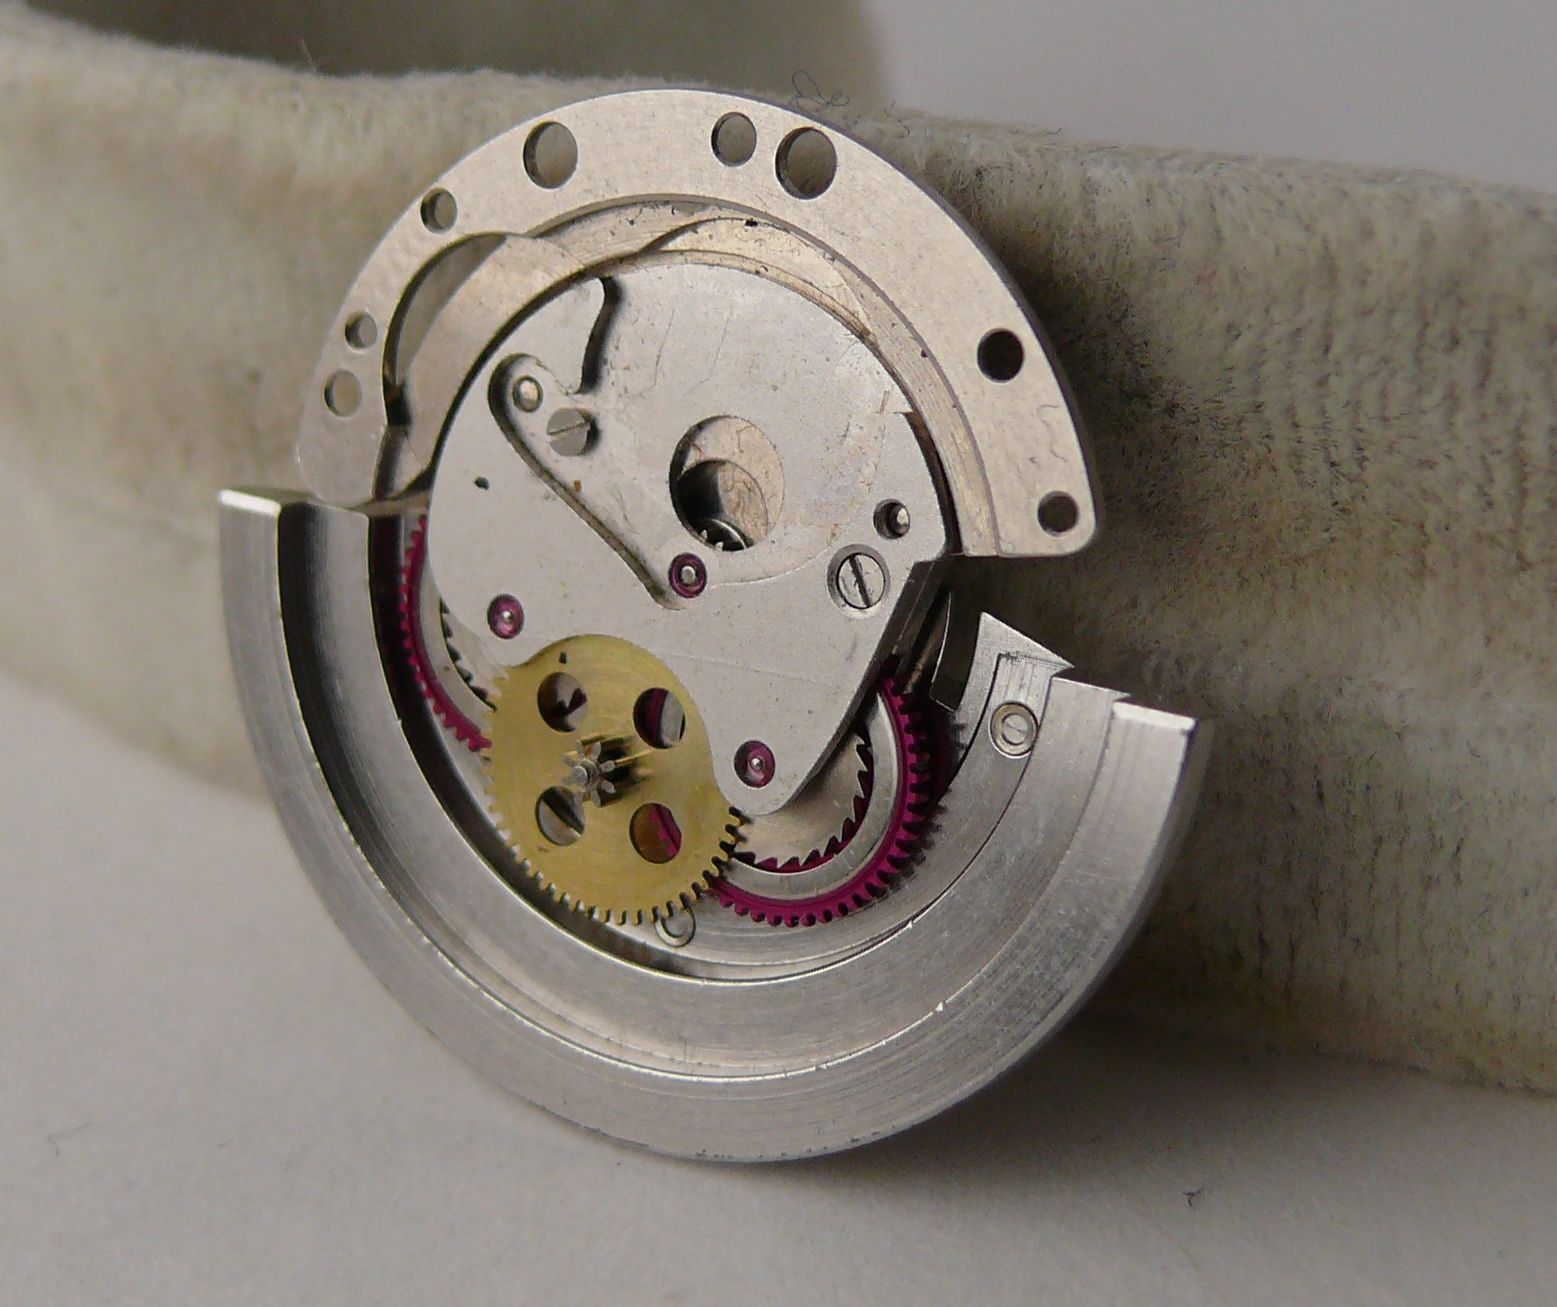 1970s Vintage Rolex 1520 Movement Automatic unit . Please note all parts are clean and genuine, - Image 8 of 9